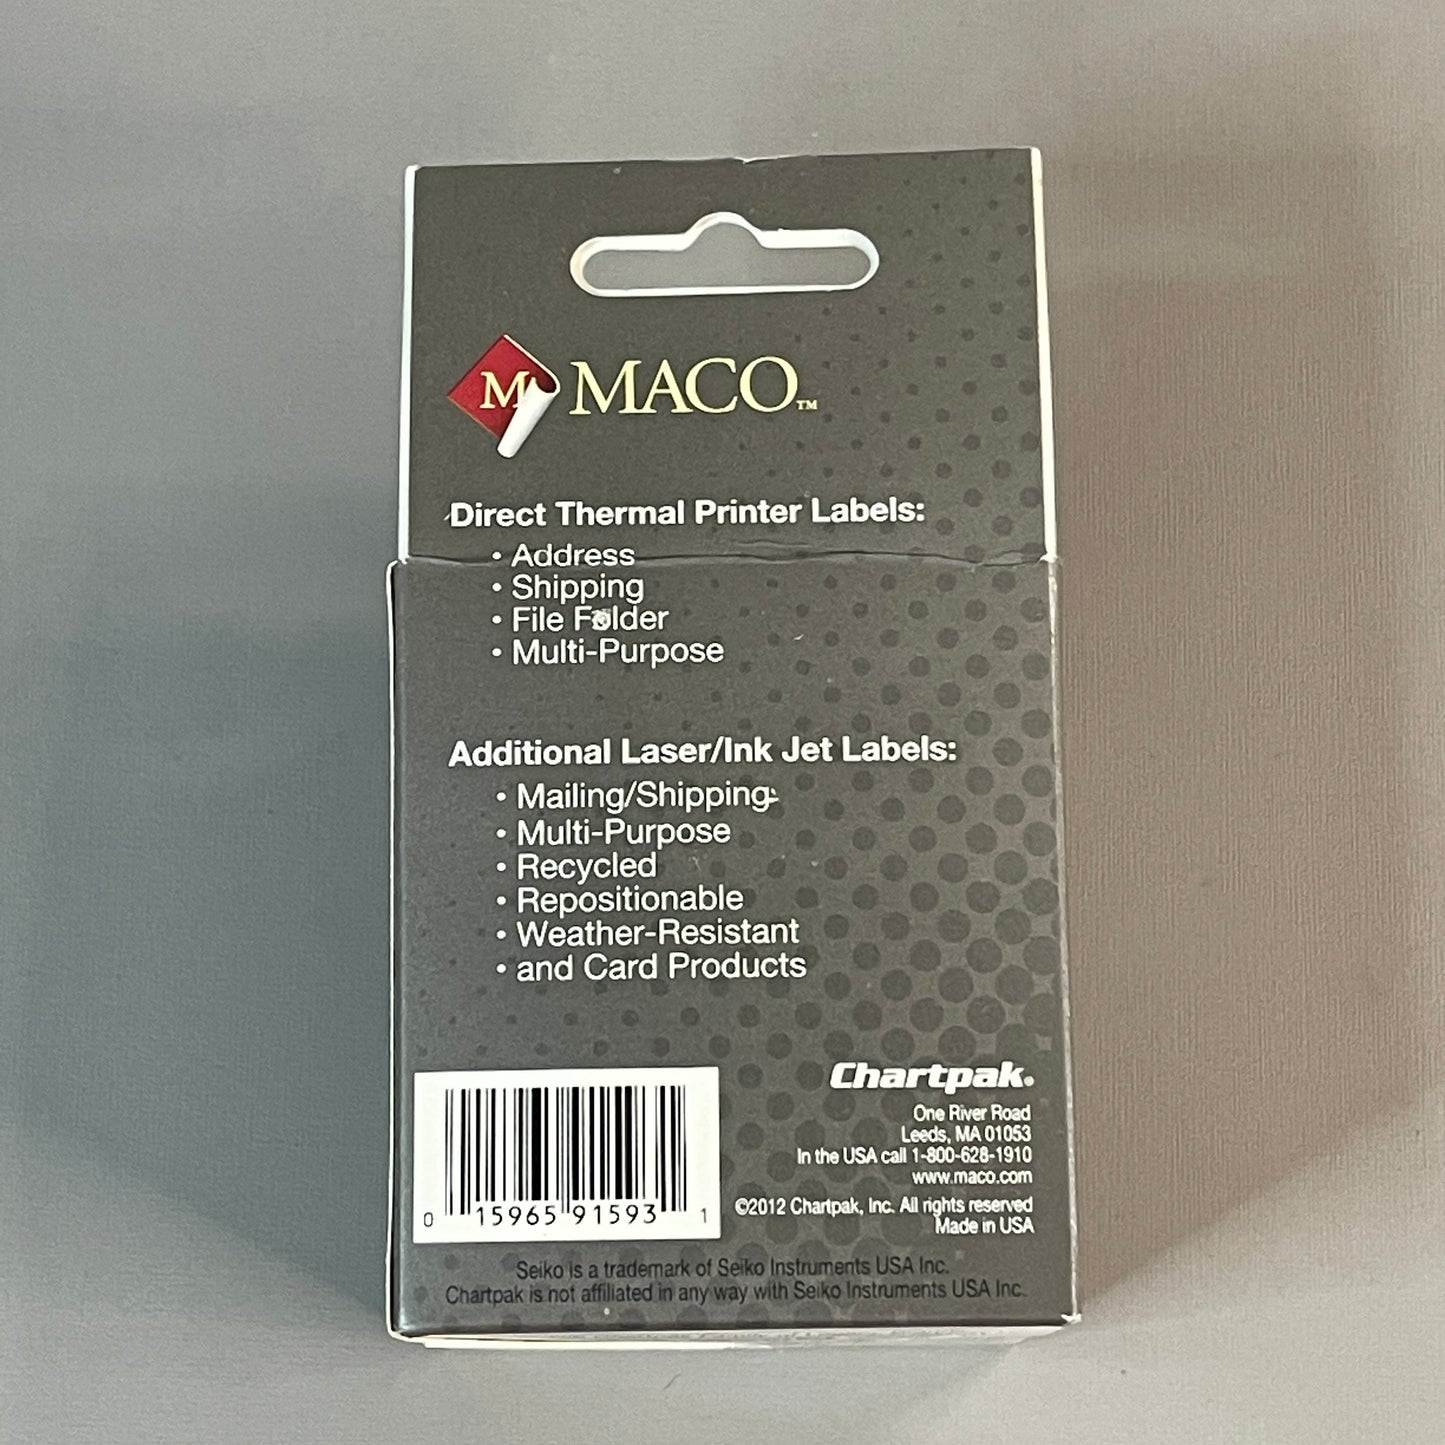 MACO Direct Thermal Printer Labels 1-1/8” x 2" 2 Rolls (440 Total Labels) White M86203